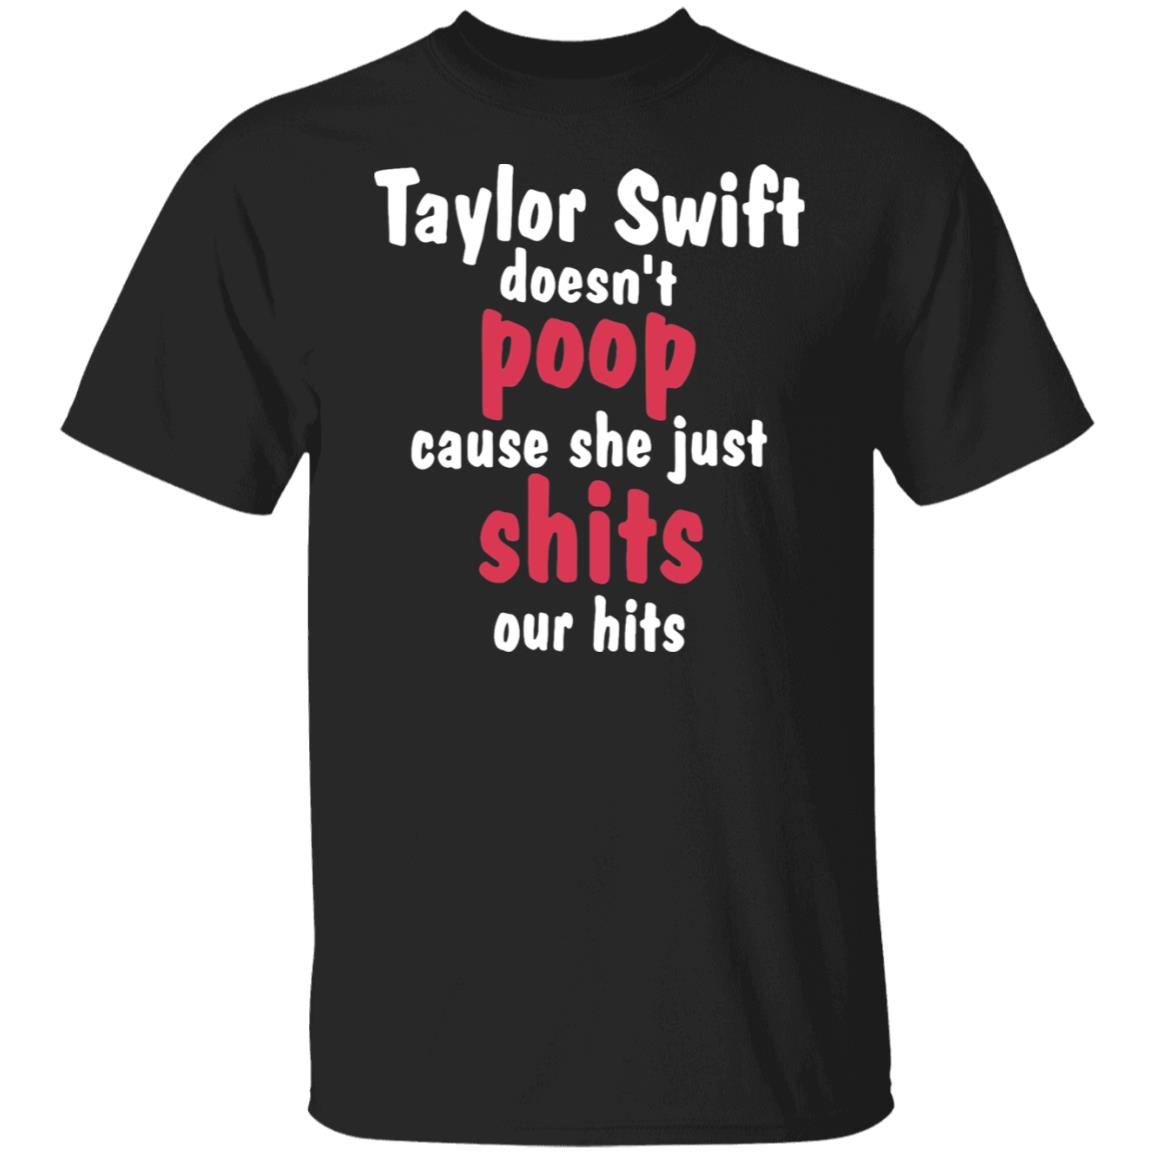 Taylor Swift Doesn't Poop Cause She Just Shits Out Hits Shirt, T-Shirt ...